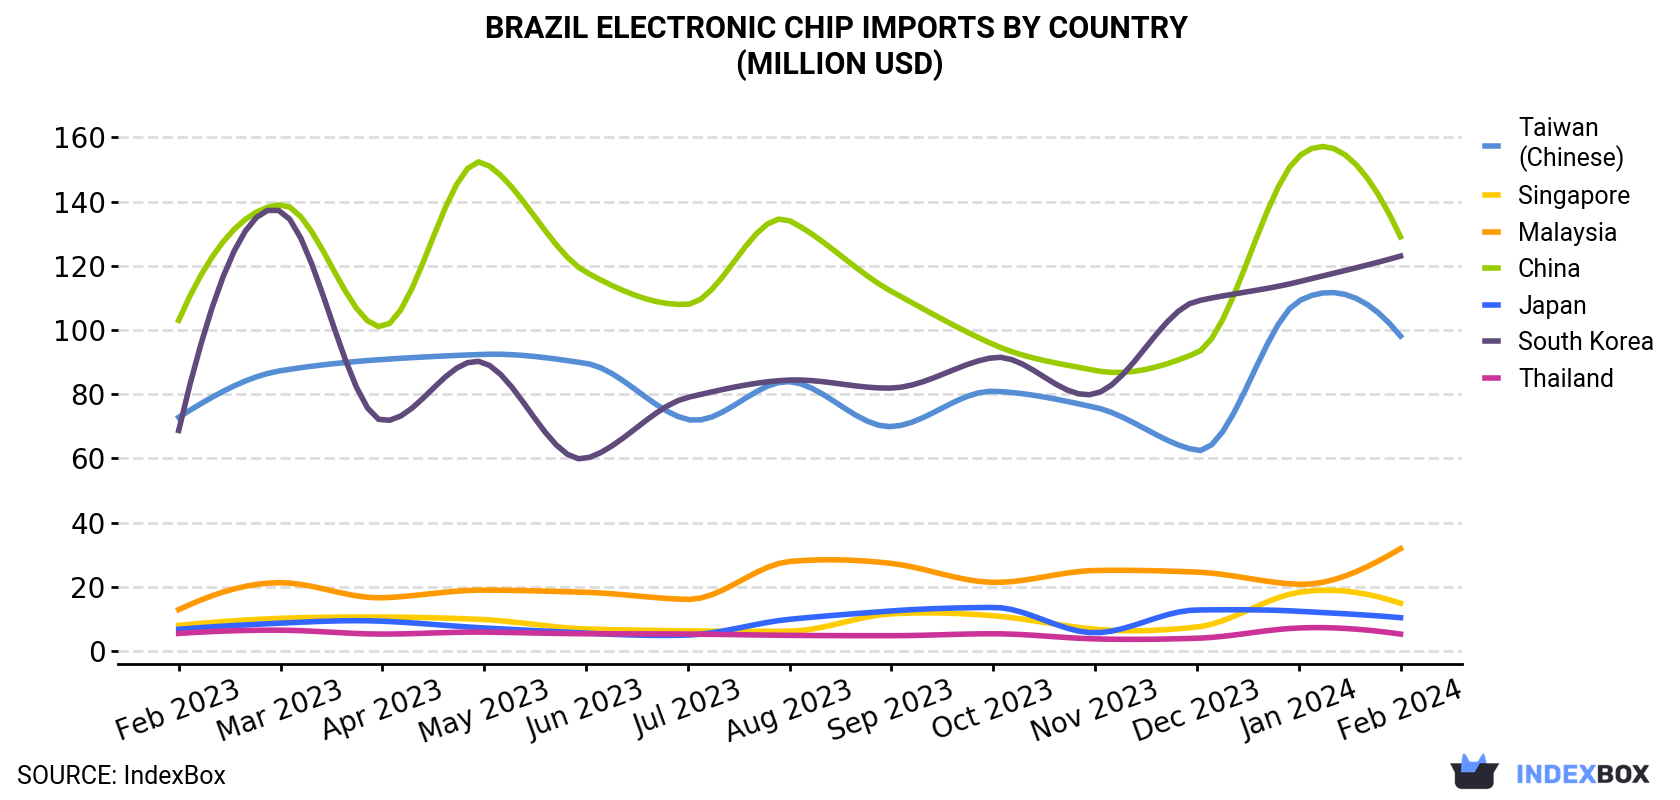 Brazil Electronic Chip Imports By Country (Million USD)